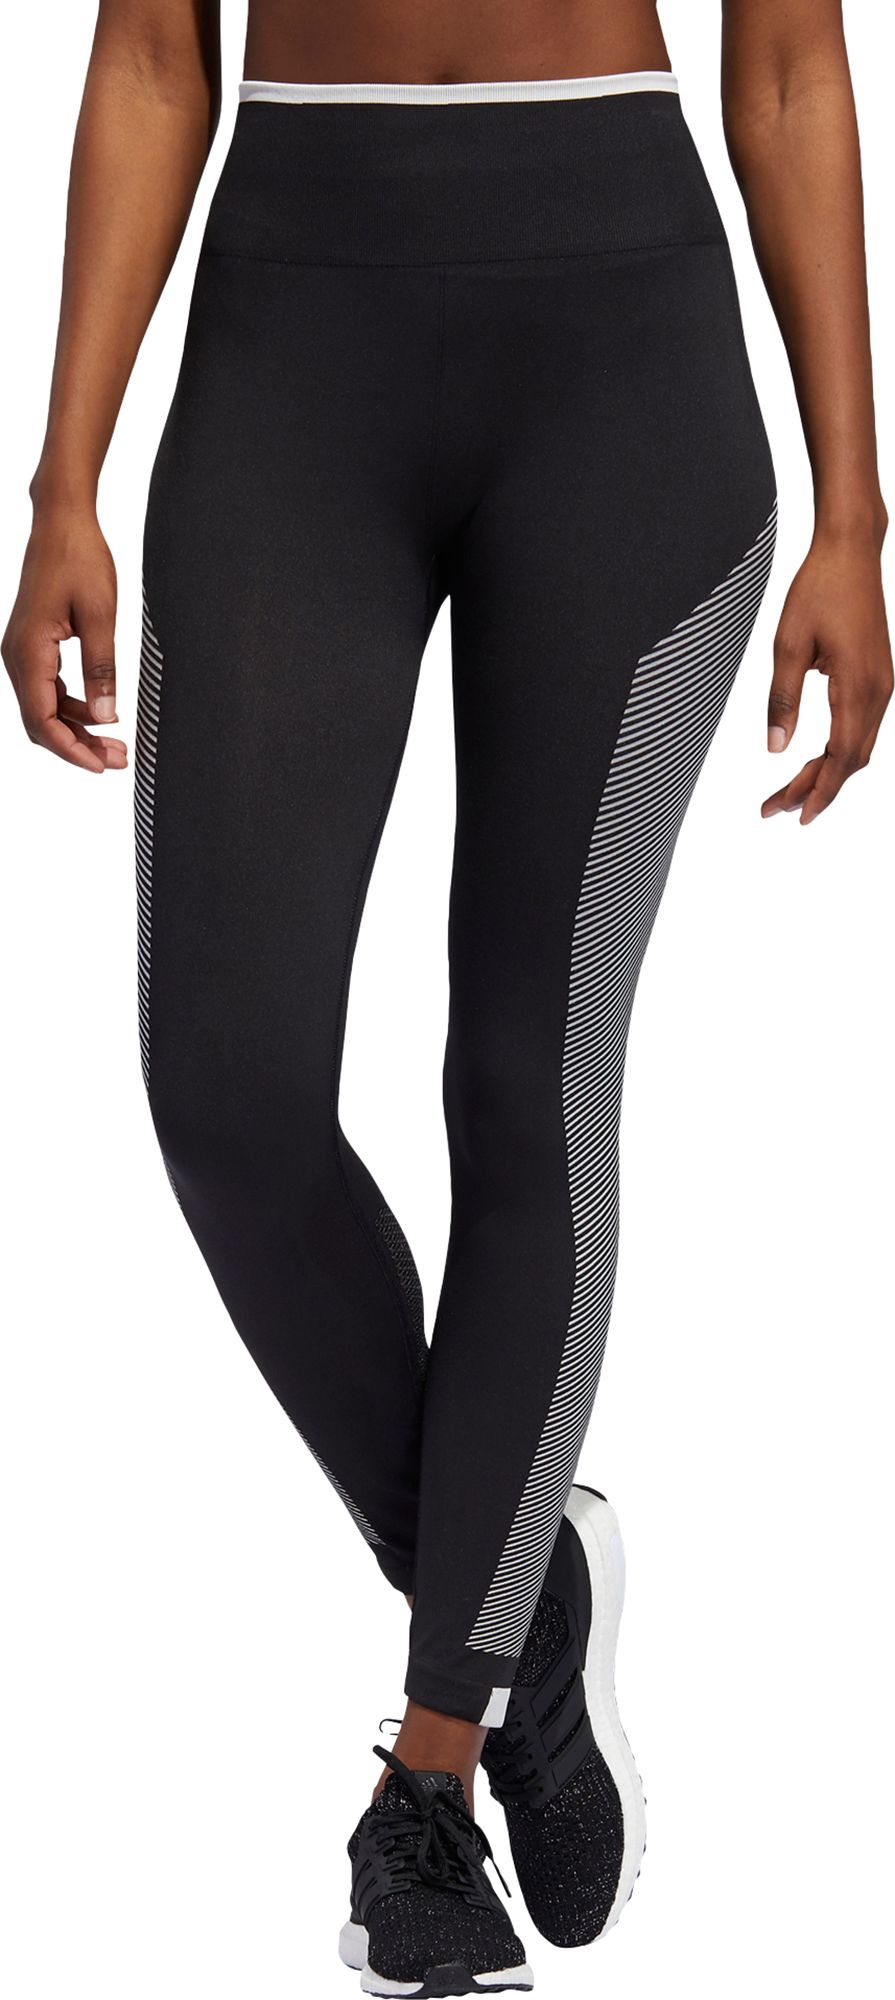 adidas believe this primeknit lux tights